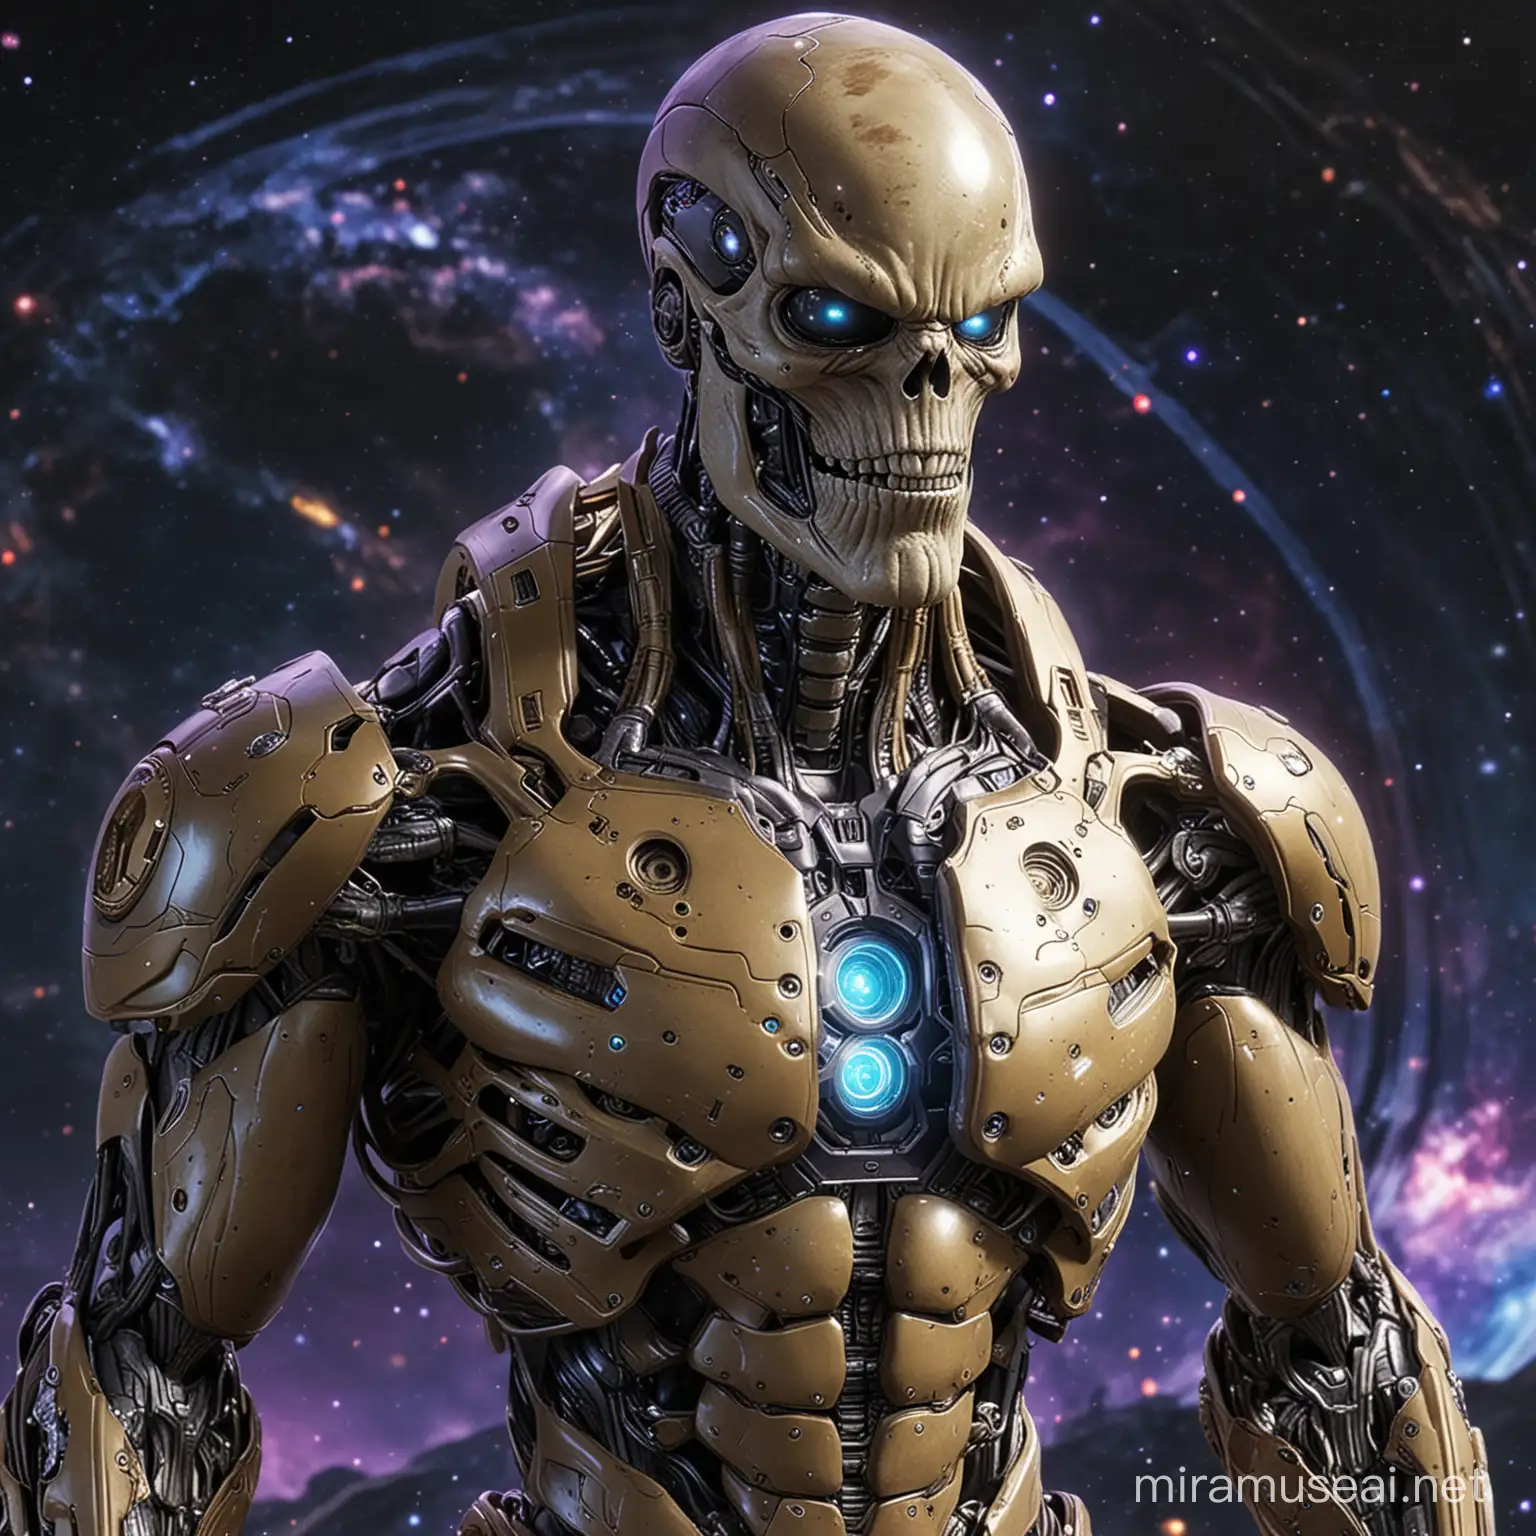 Interdimensional Creation AlienCyborgSkeleton Fusion with Thanos in Jupiter Reality Capsule